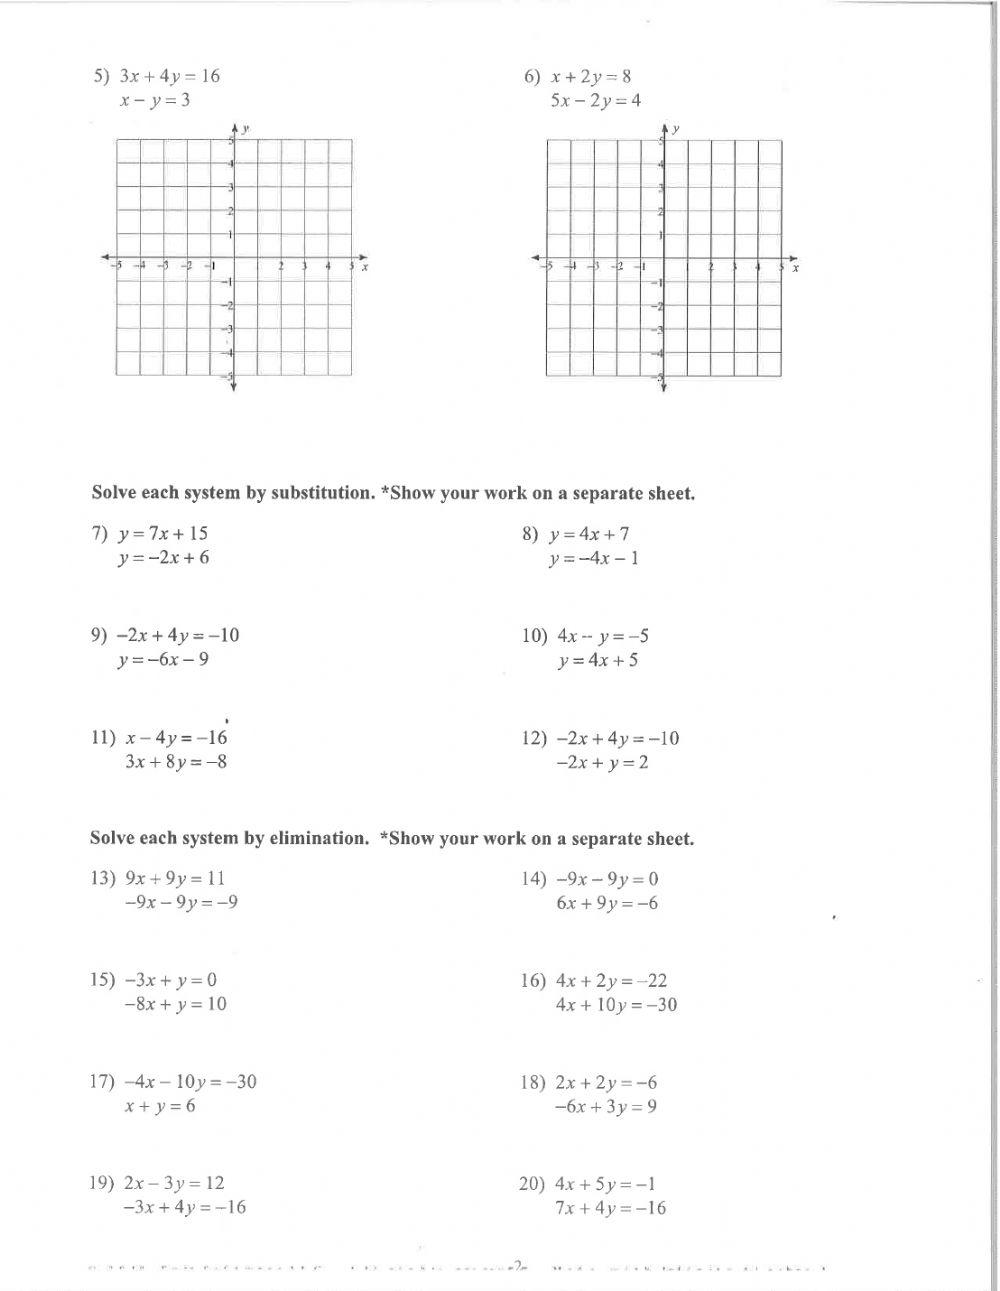 Solving Systems of Equations - Mixed Review